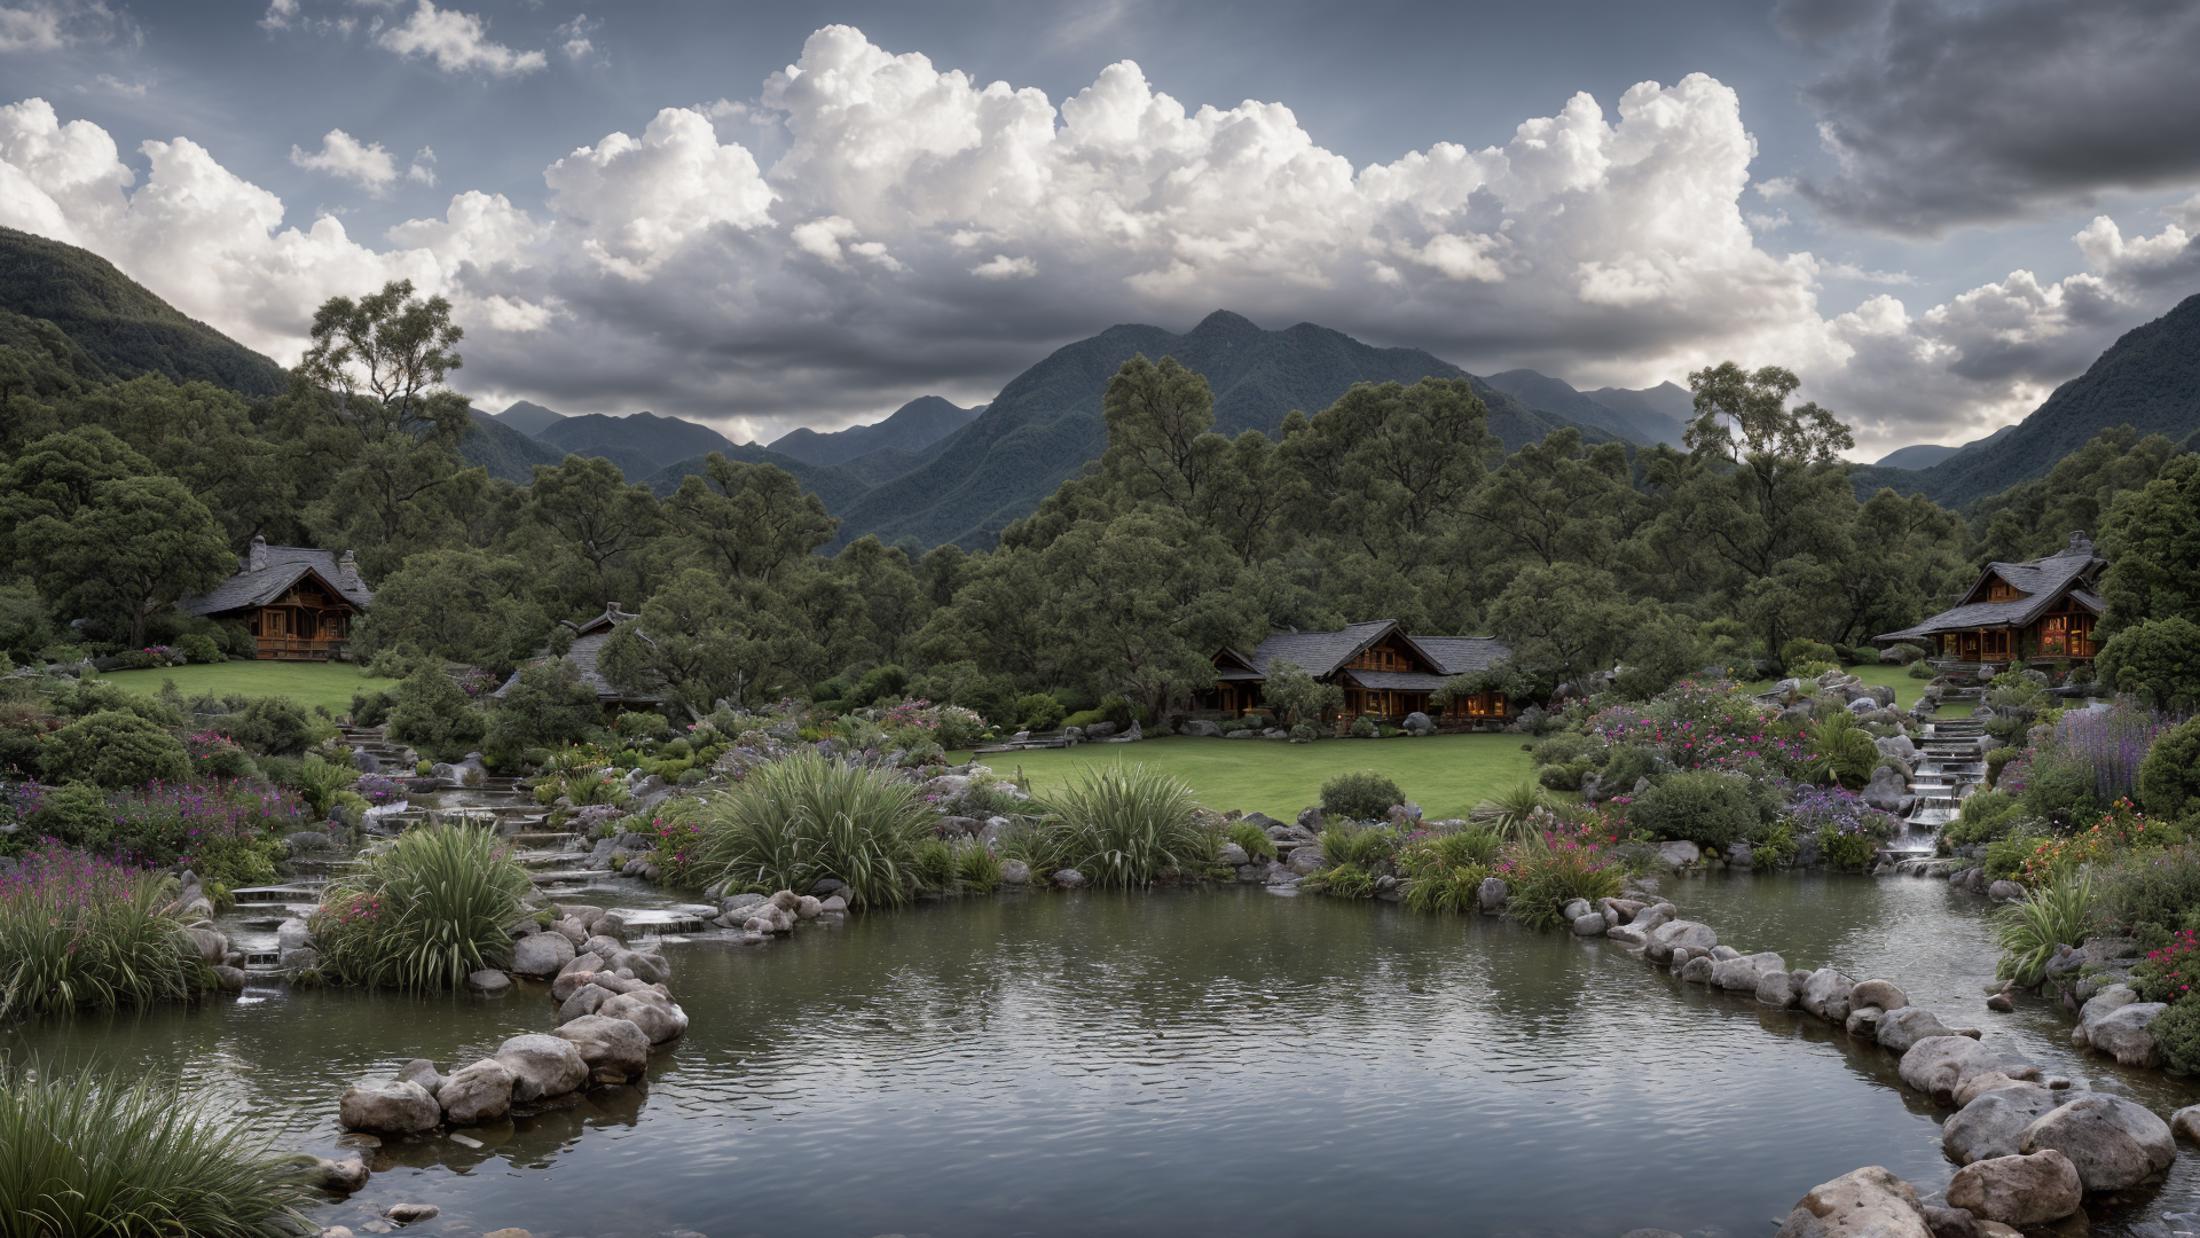 A serene mountain valley with a house and pond surrounded by trees.